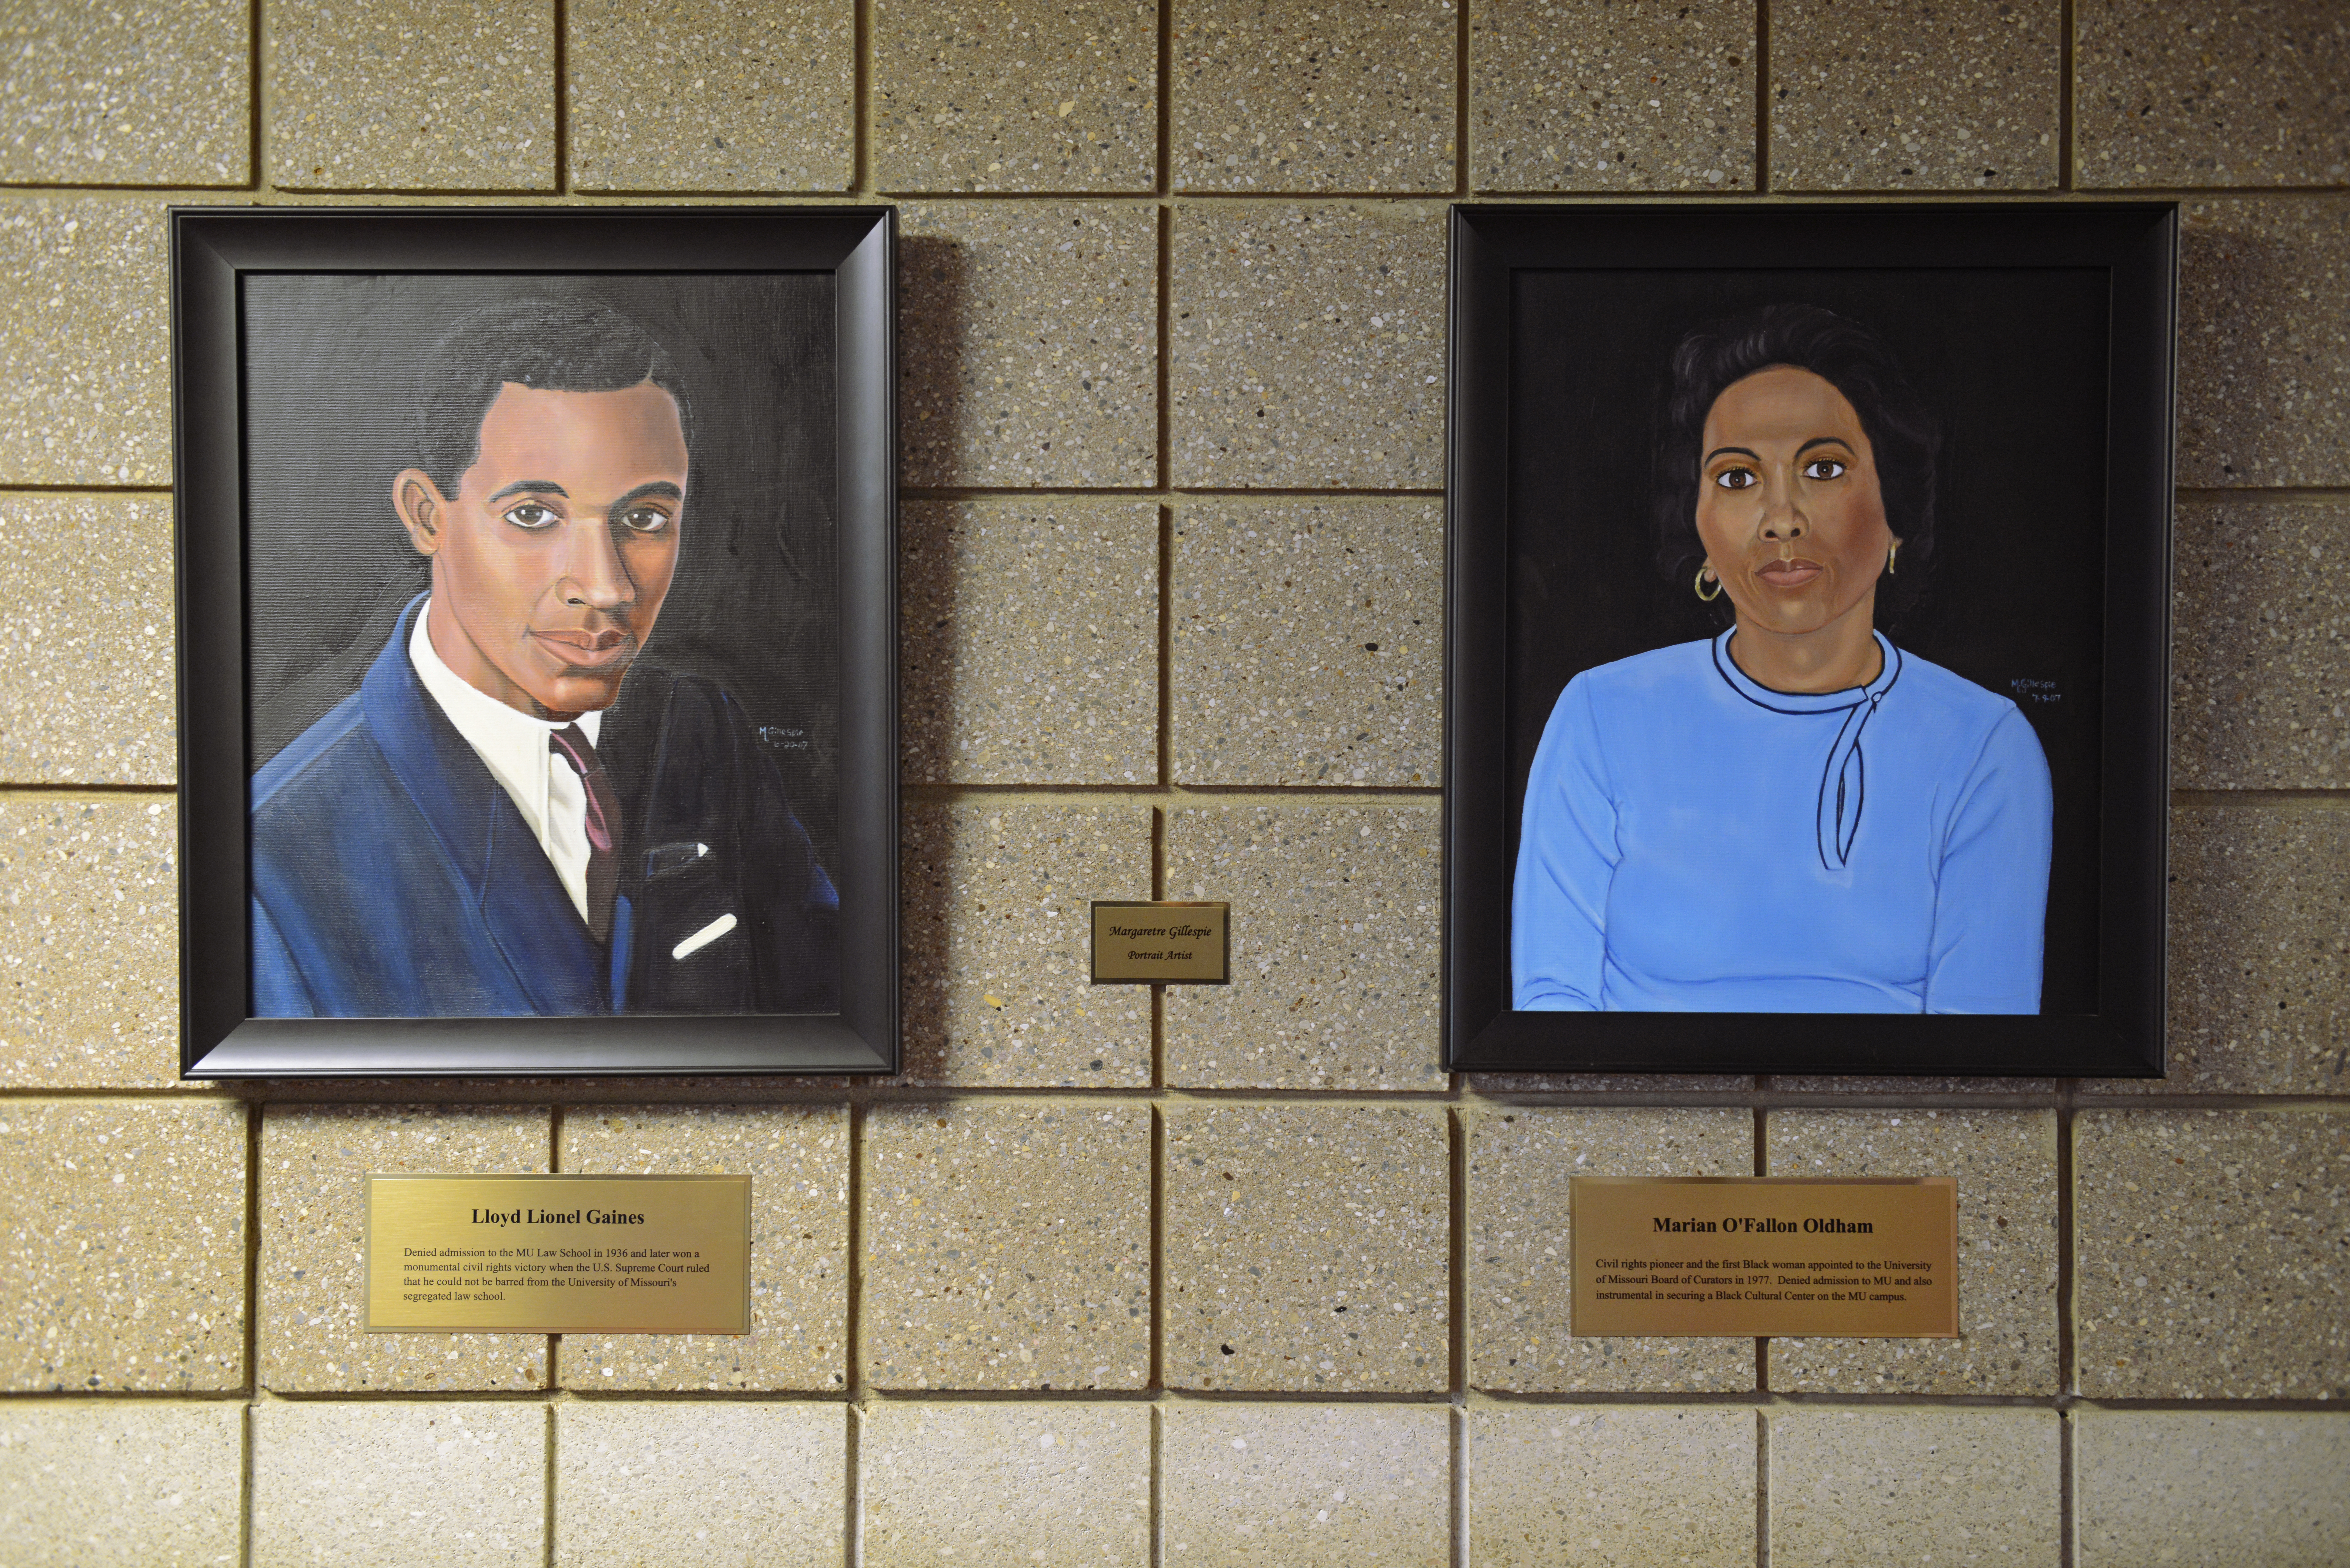 Portraits depicting Lloyd Lionel Gaines and Dr. Marian OÕFallon Oldham hang inside the Gaines/Oldham Black Culture Center on Nov. 6, 2015. Gaines was denied admission to Missouri's law school in 1936 because of his race, taking the case to the Supreme Court, where he won. Dr. Oldham was a former St. Louis school teacher and civil rights activist who was denied admission to the University of Missouri based on her race. Oldham went on to become the first Black woman curator on the University of Missouri Board of Curators in March 1977.